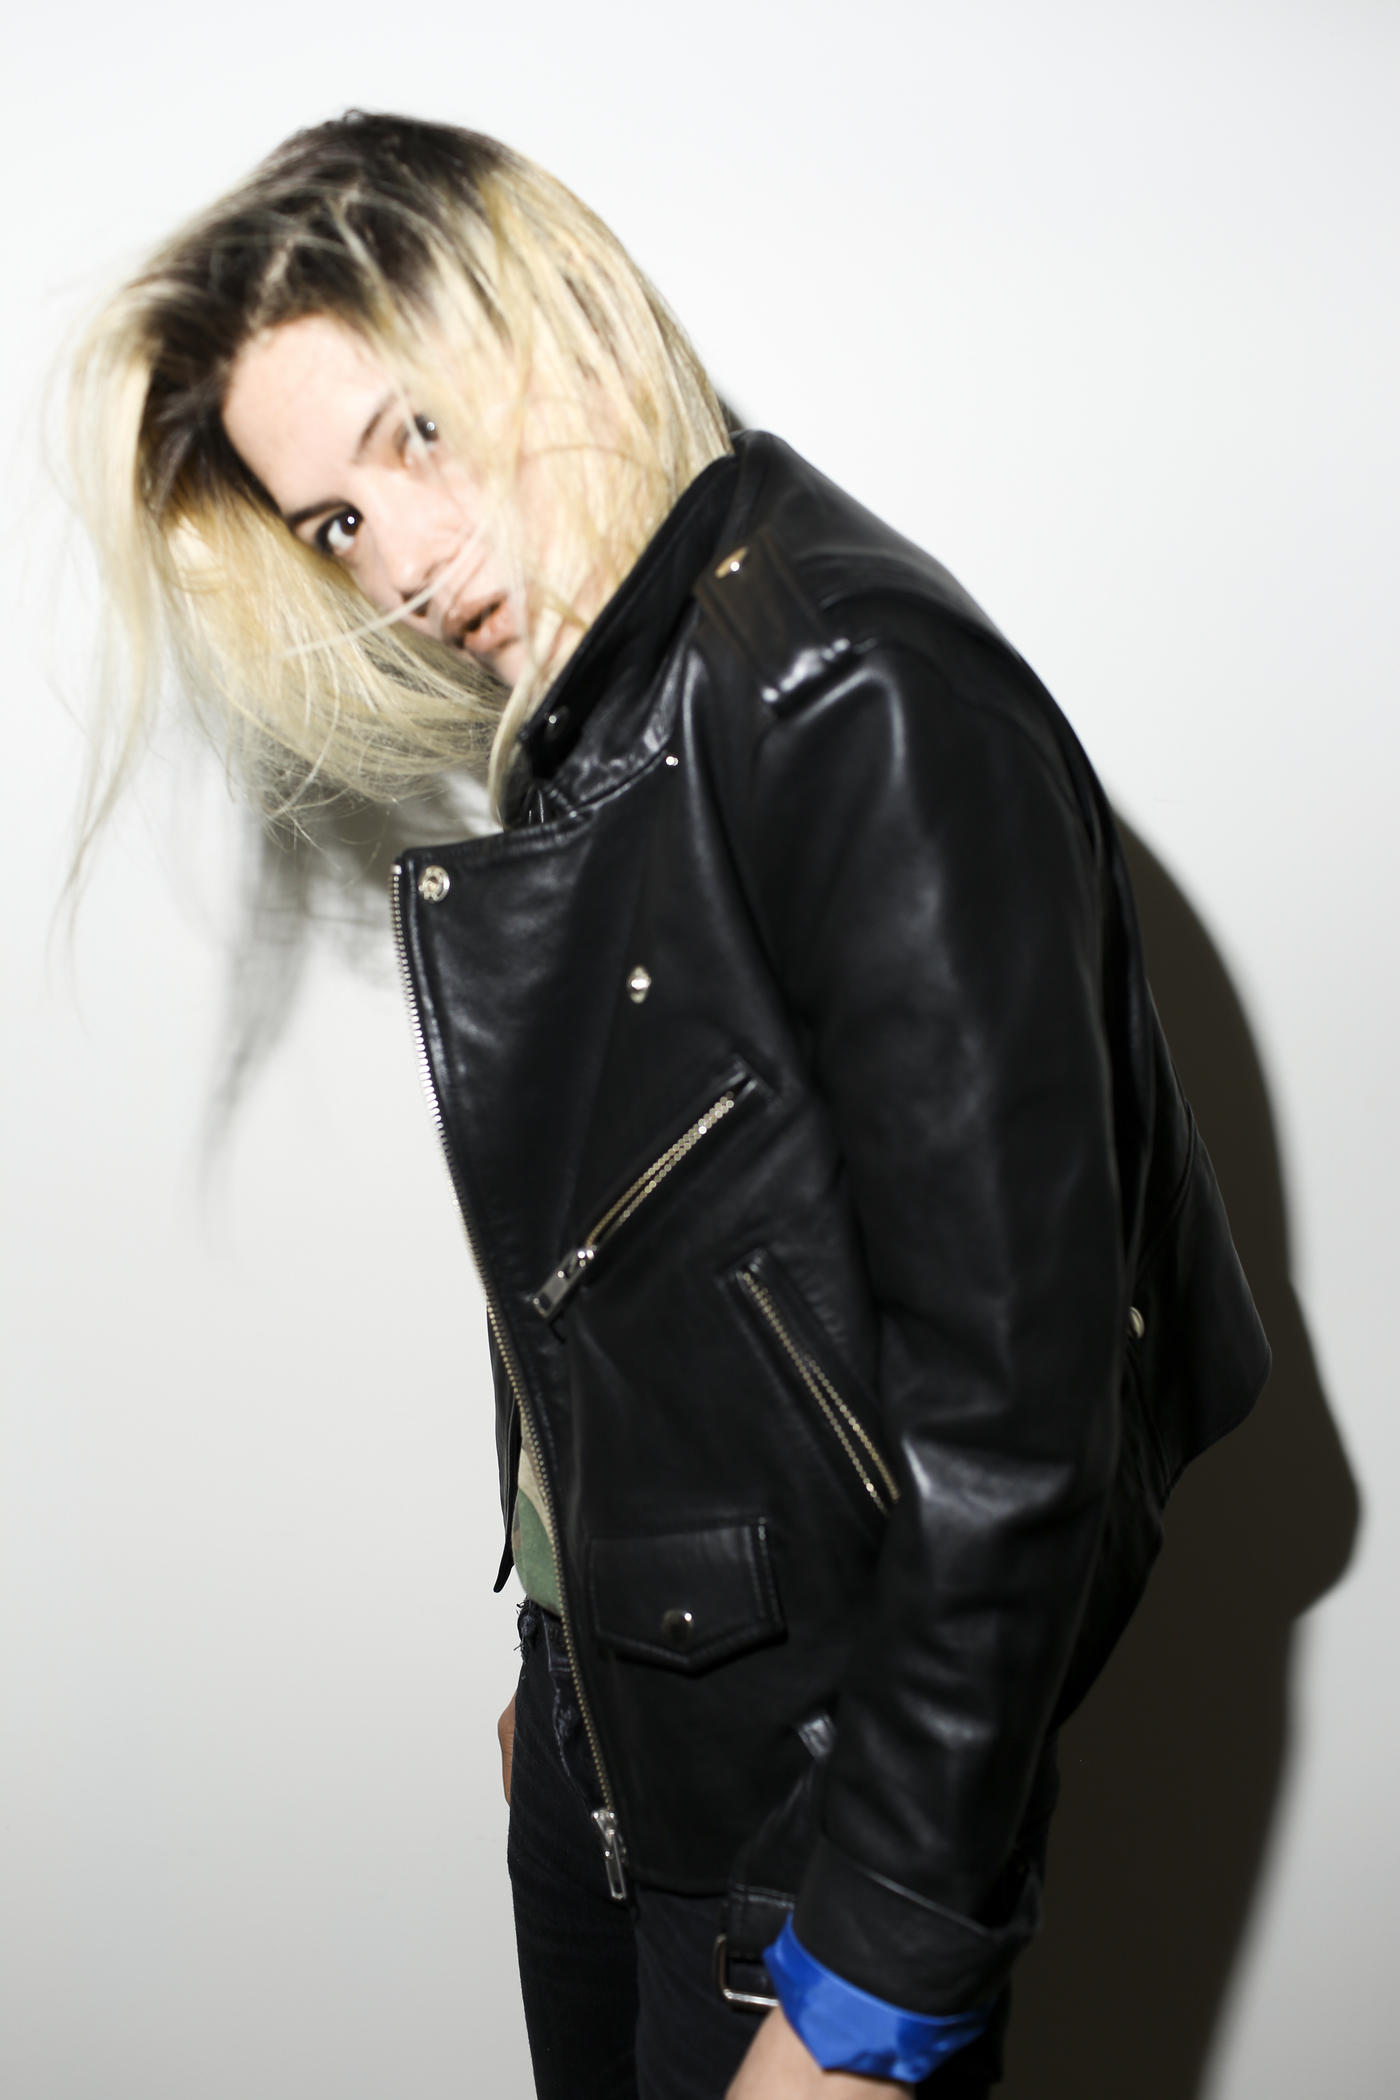 Alison Mosshart on The Kills, Female Influences, and Maintaining Her Independence